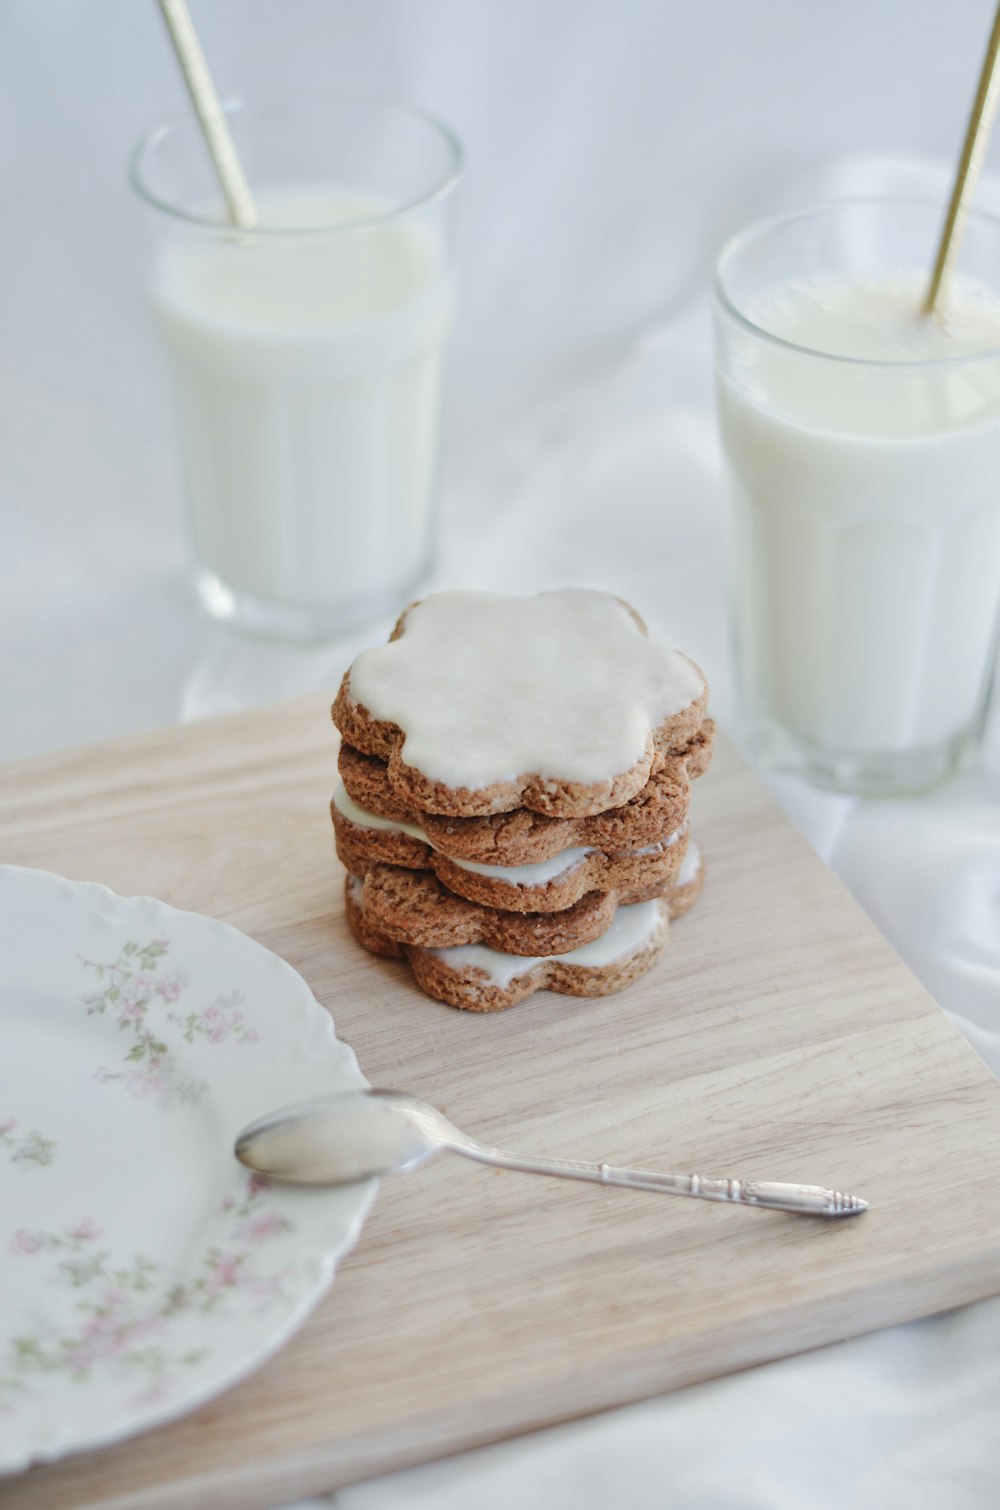 cookies on white ceramic plate beside stainless steel fork